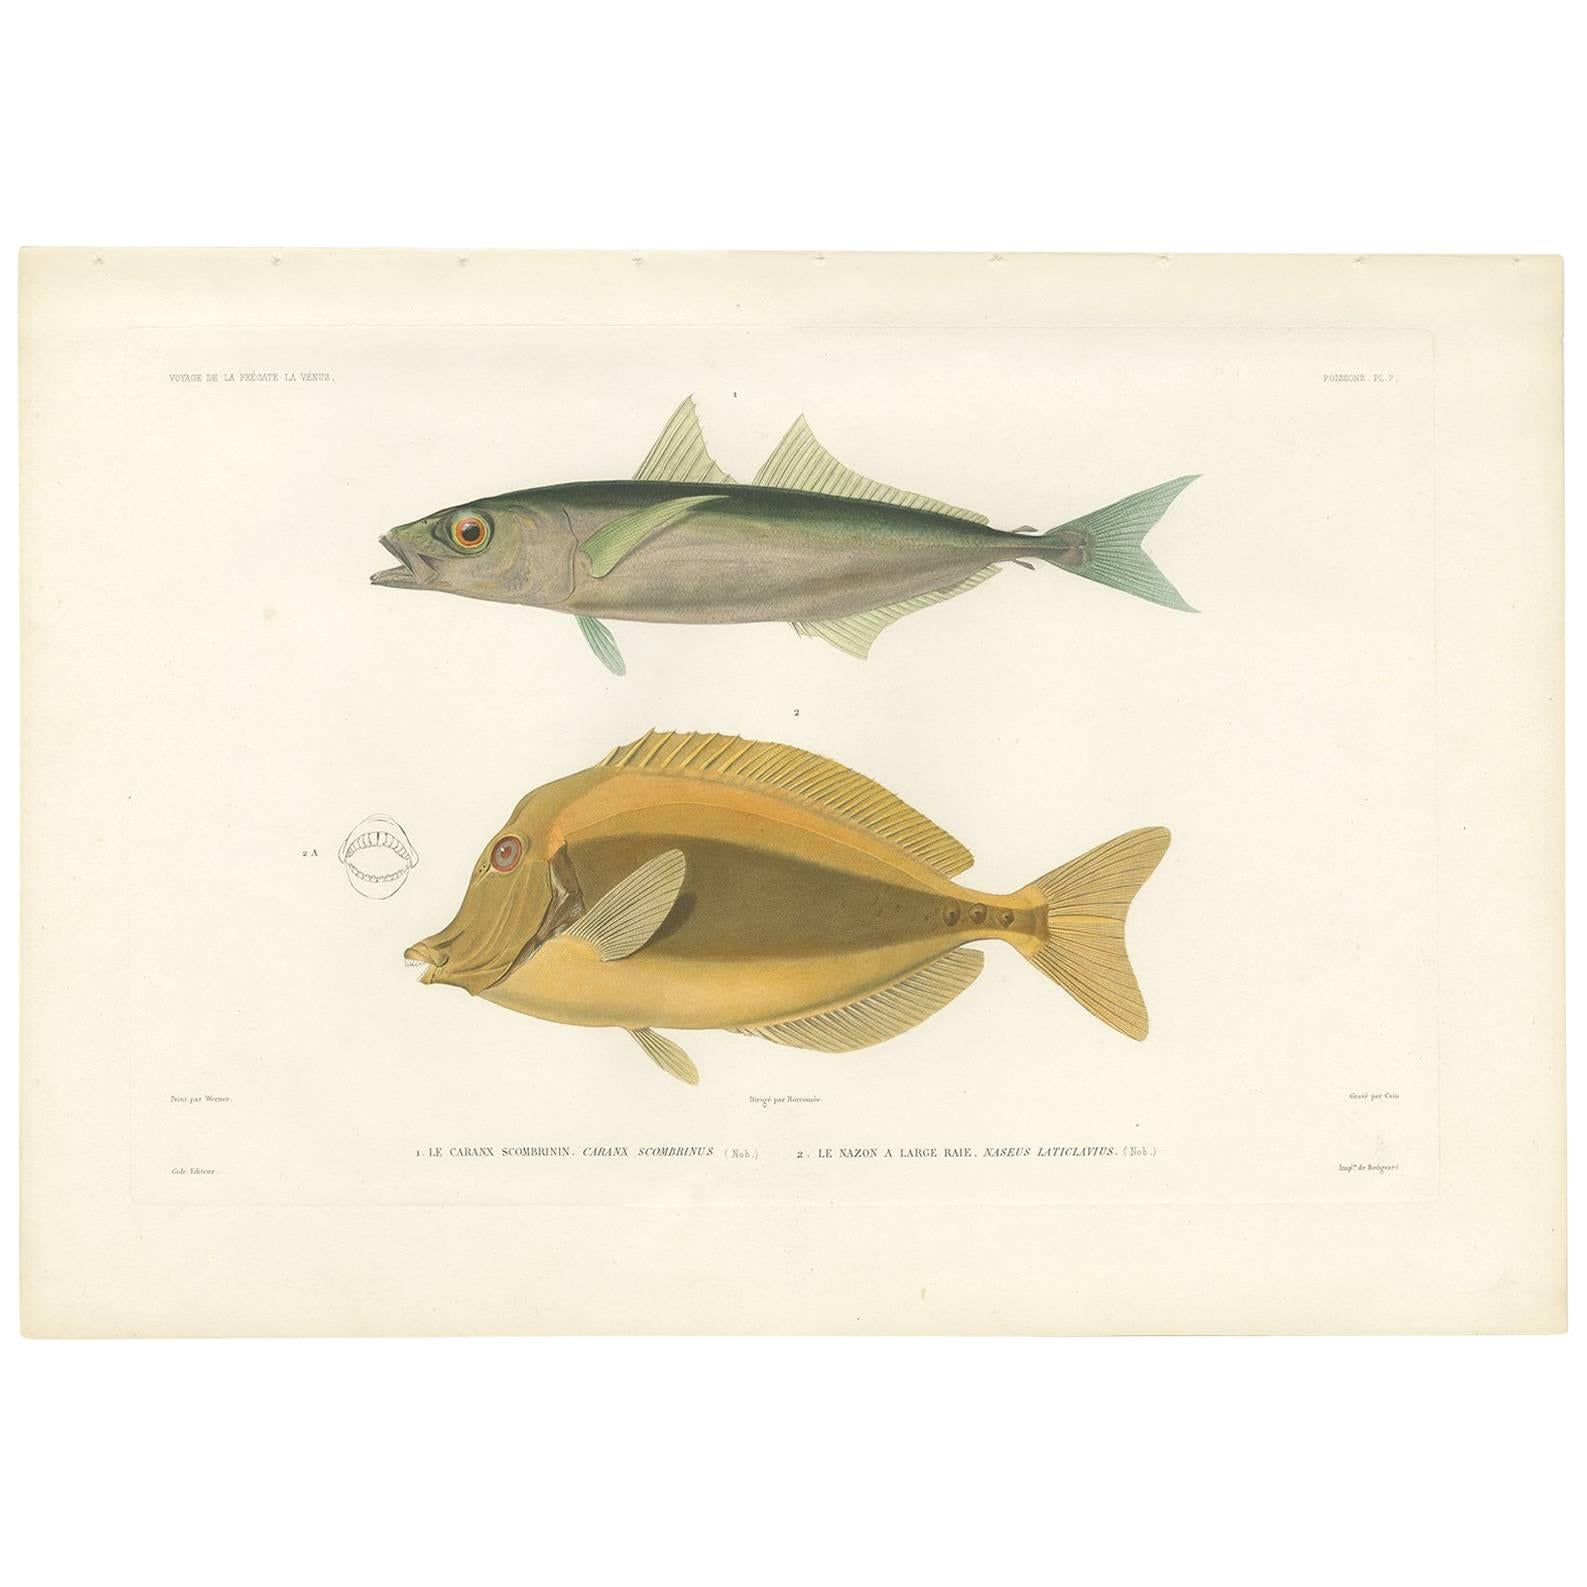 Antique Fish Print of the Amberstripe Scad and the Razor Surgeonfish, 1846